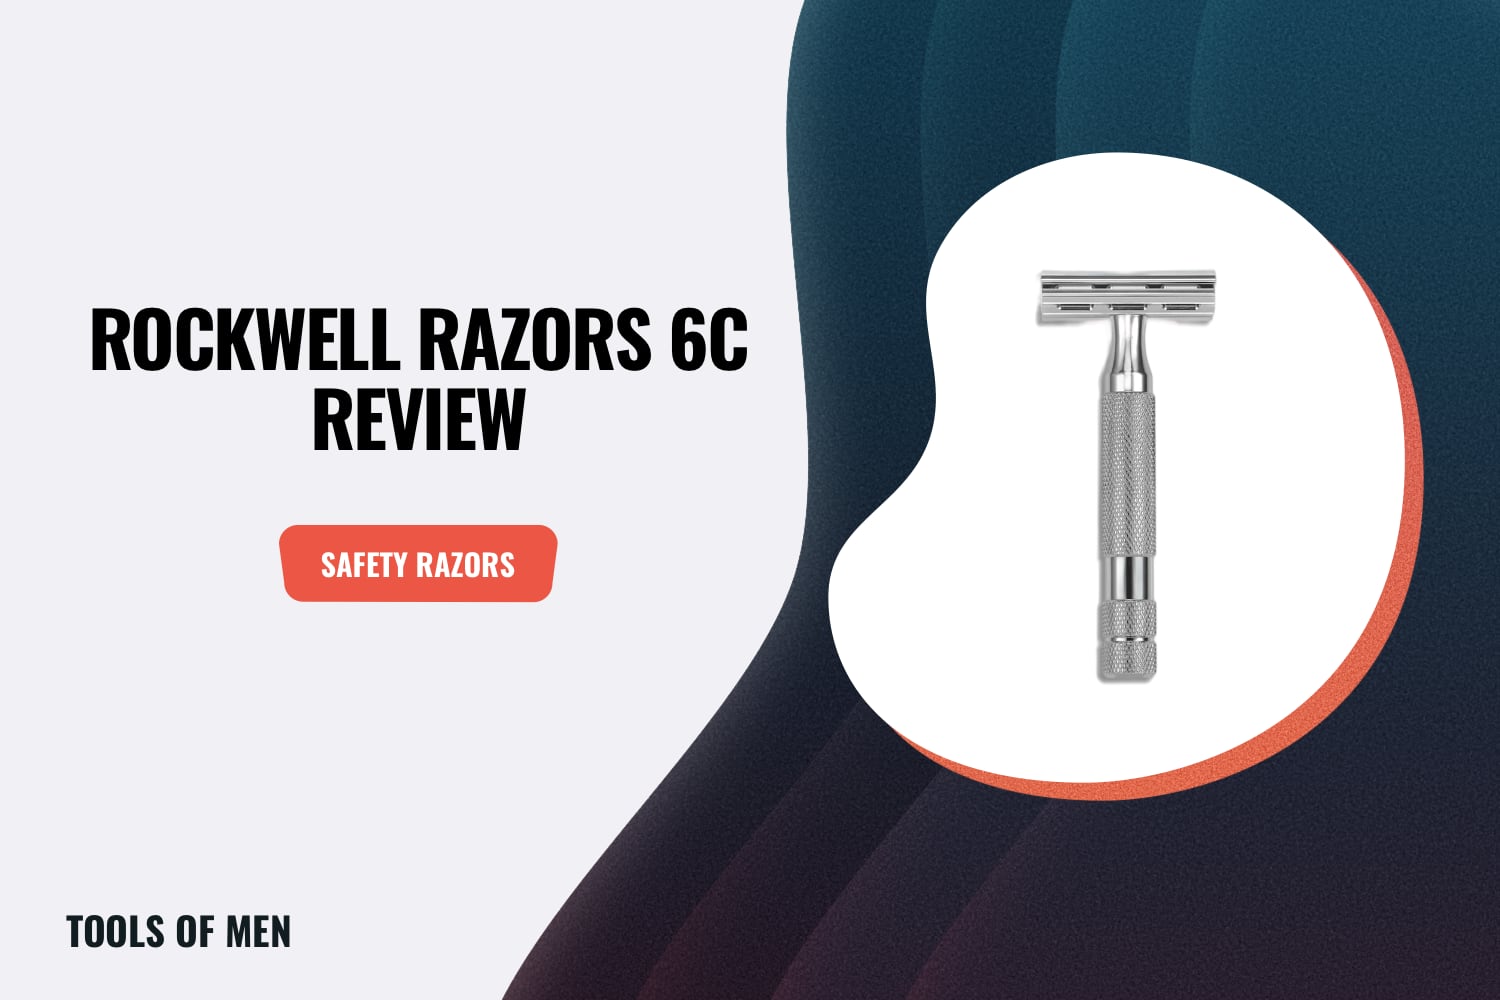 Rockwell Razors 6C Review feature image 2